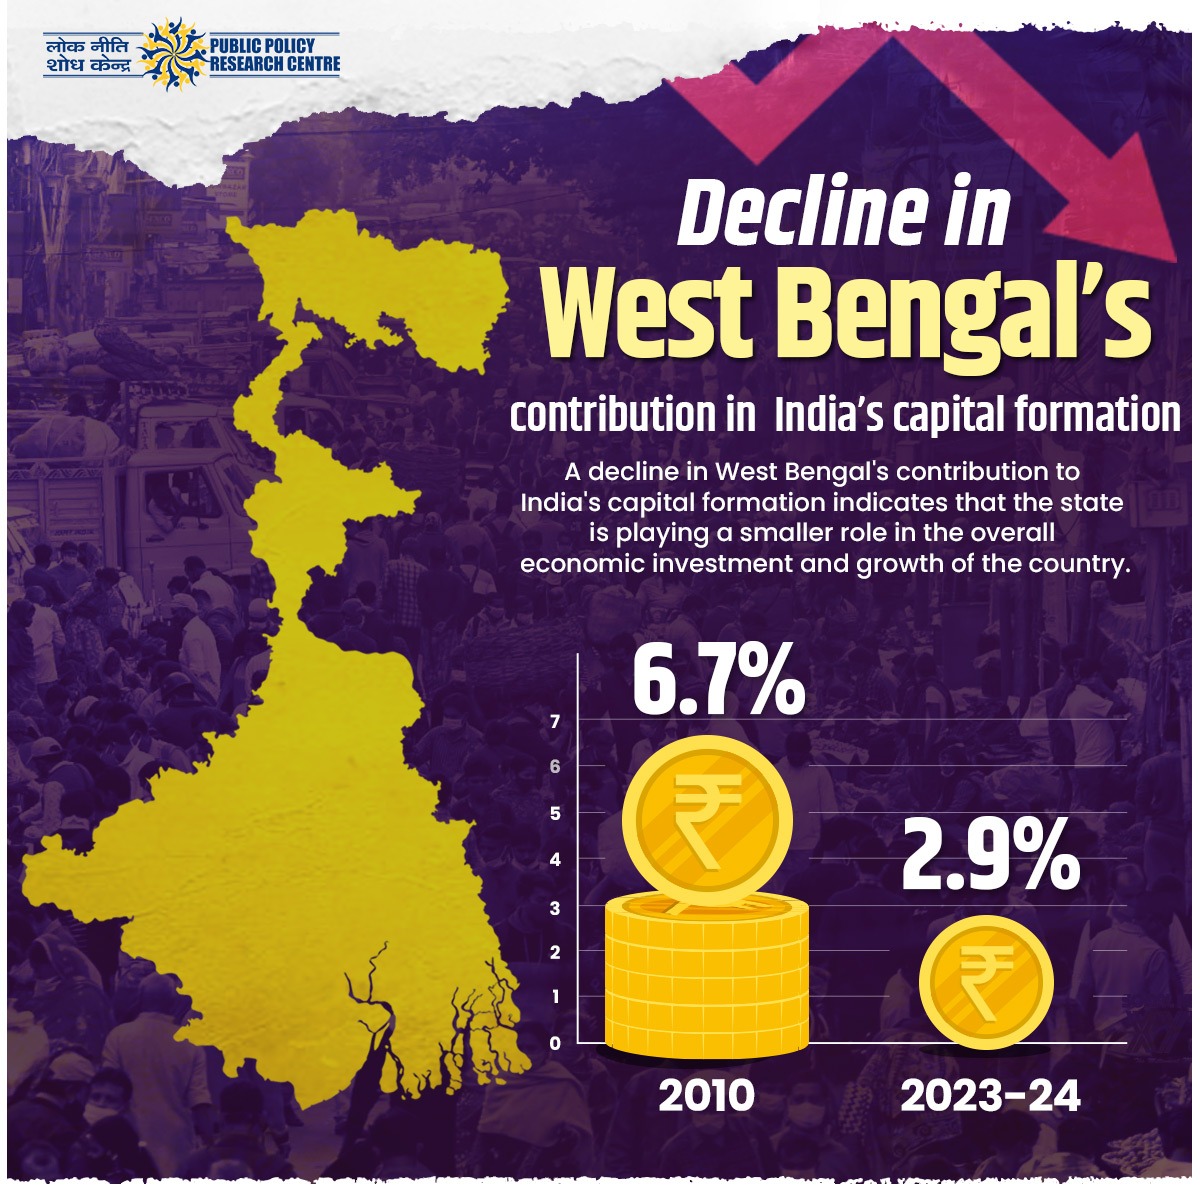 West Bengal’s contribution to India’s capital formation has plummeted from 6.7% in 2010 to 2.9% in 2023-24. This sharp decline highlights the state's diminishing role in India's economic investment and growth. 

#EconomicTrends #WestBengal #IndiaGrowth